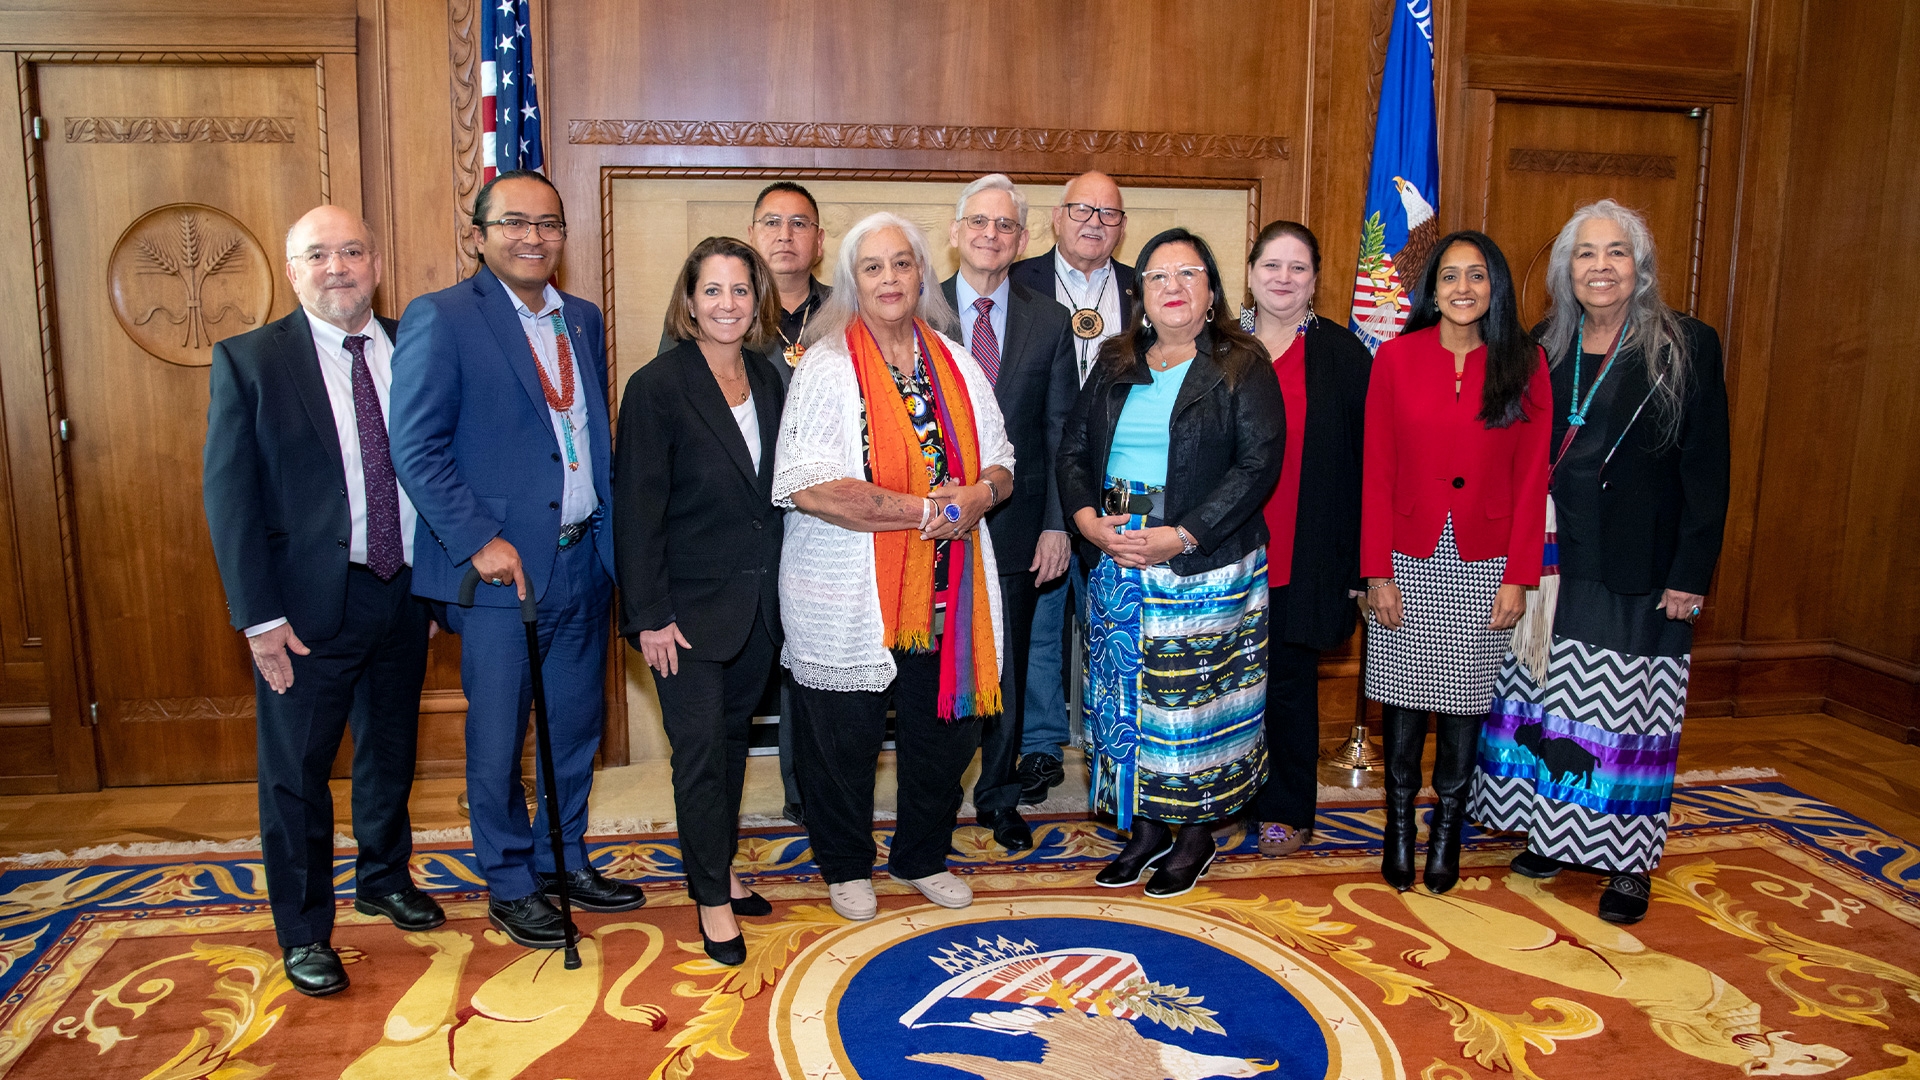 Attorney General Garland, Deputy Attorney General Monaco, and Associate Attorney General Gupta with the Tribal Nations Leadership Council.